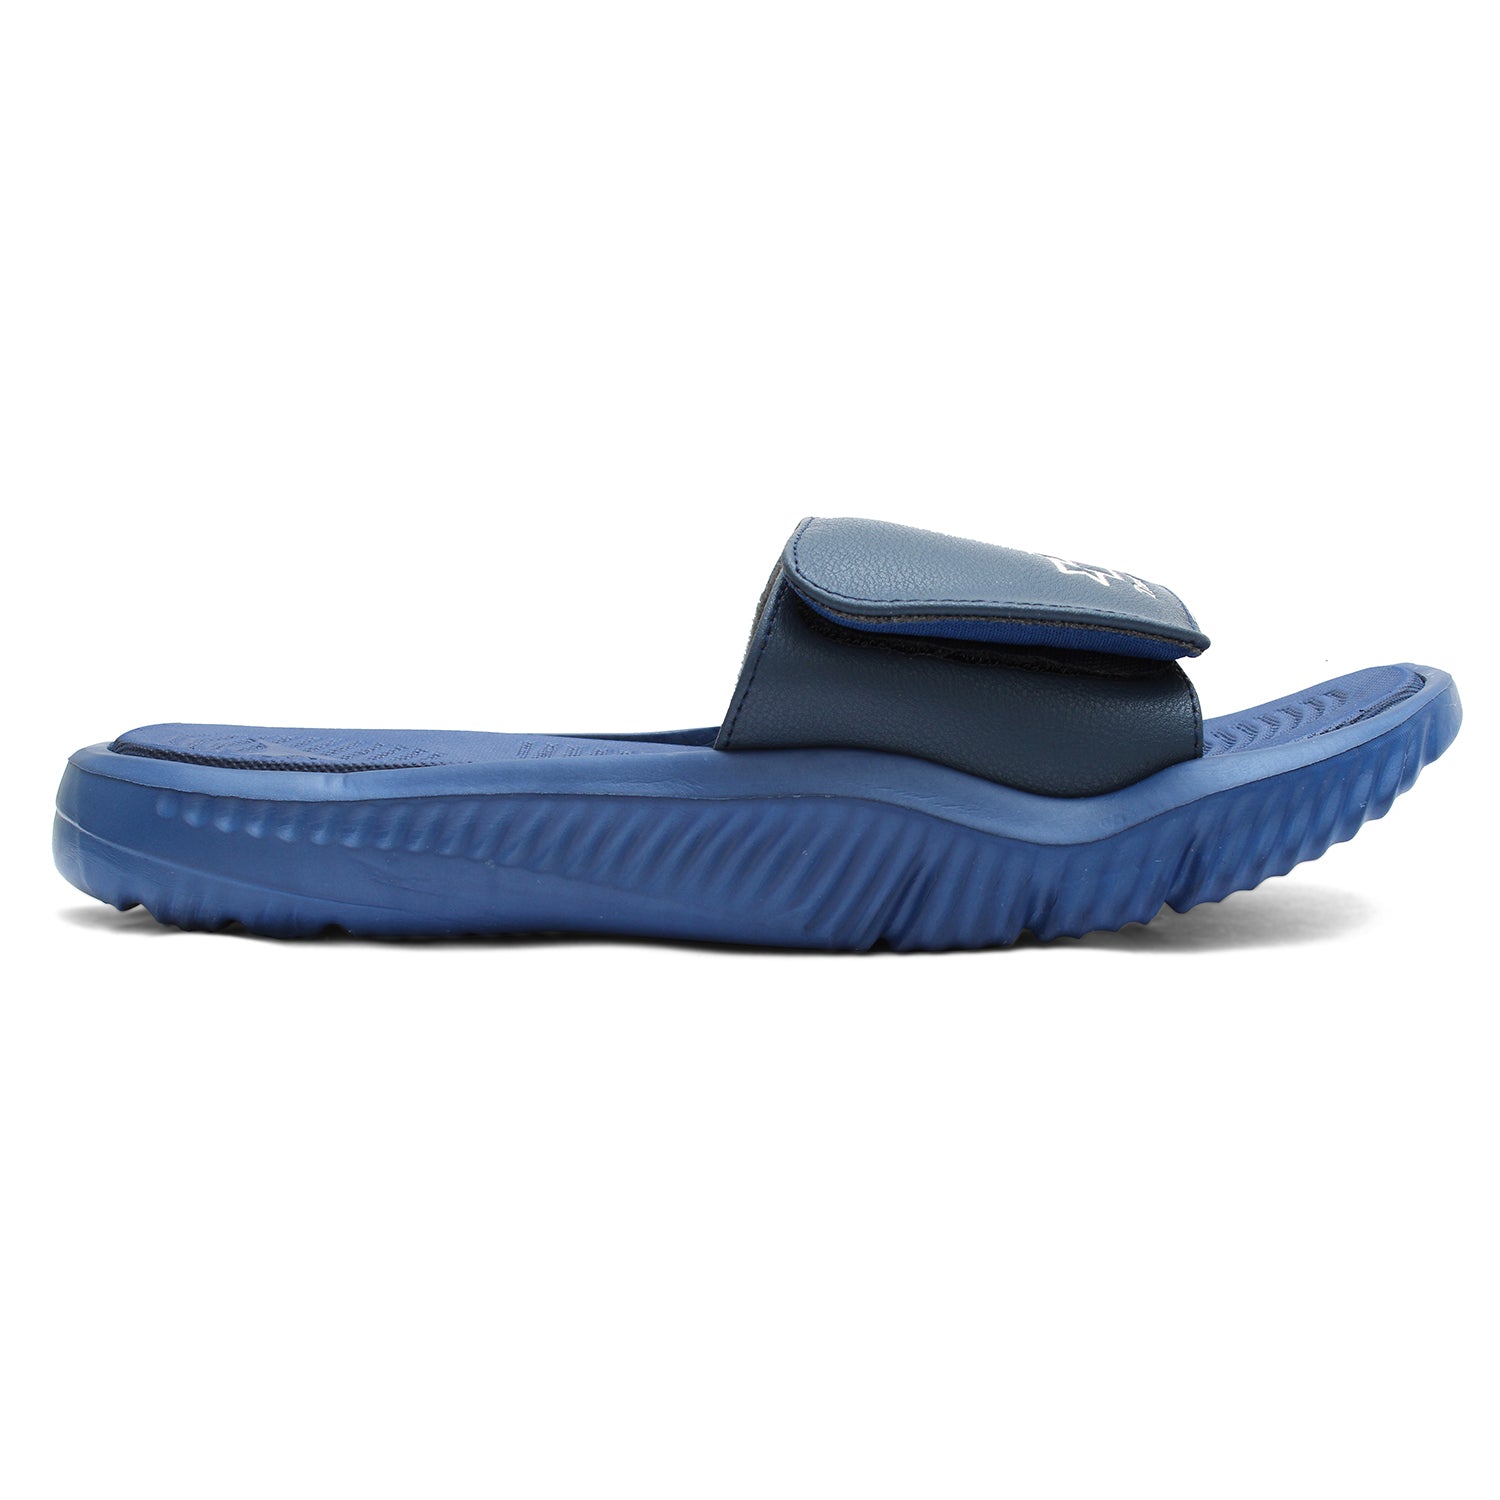 Shop Mens Lightweight and Comfortable Flat Slippers